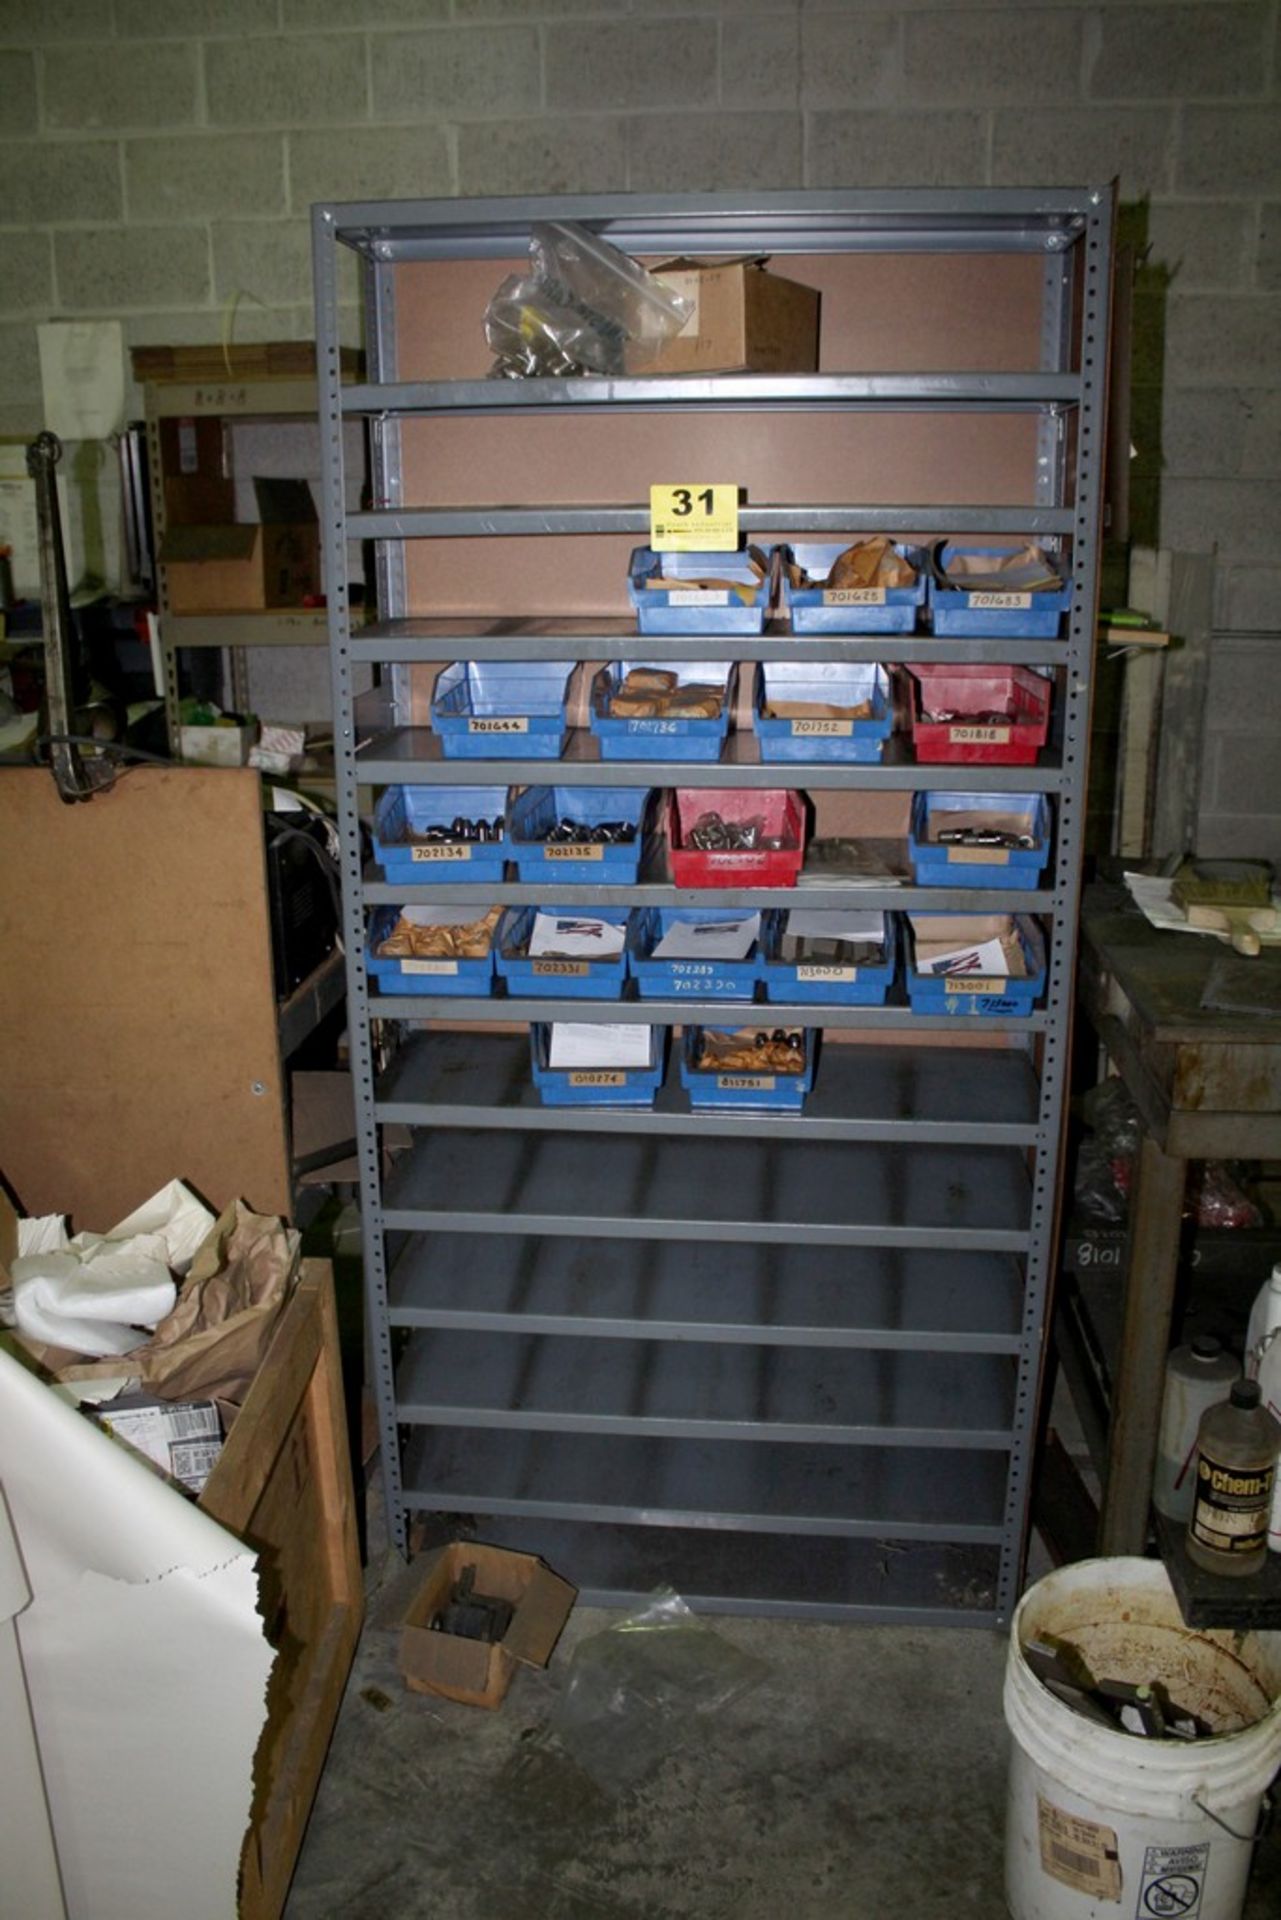 36" X 12" X 78" STEEL SHELVING UNIT WITH CONTENTS